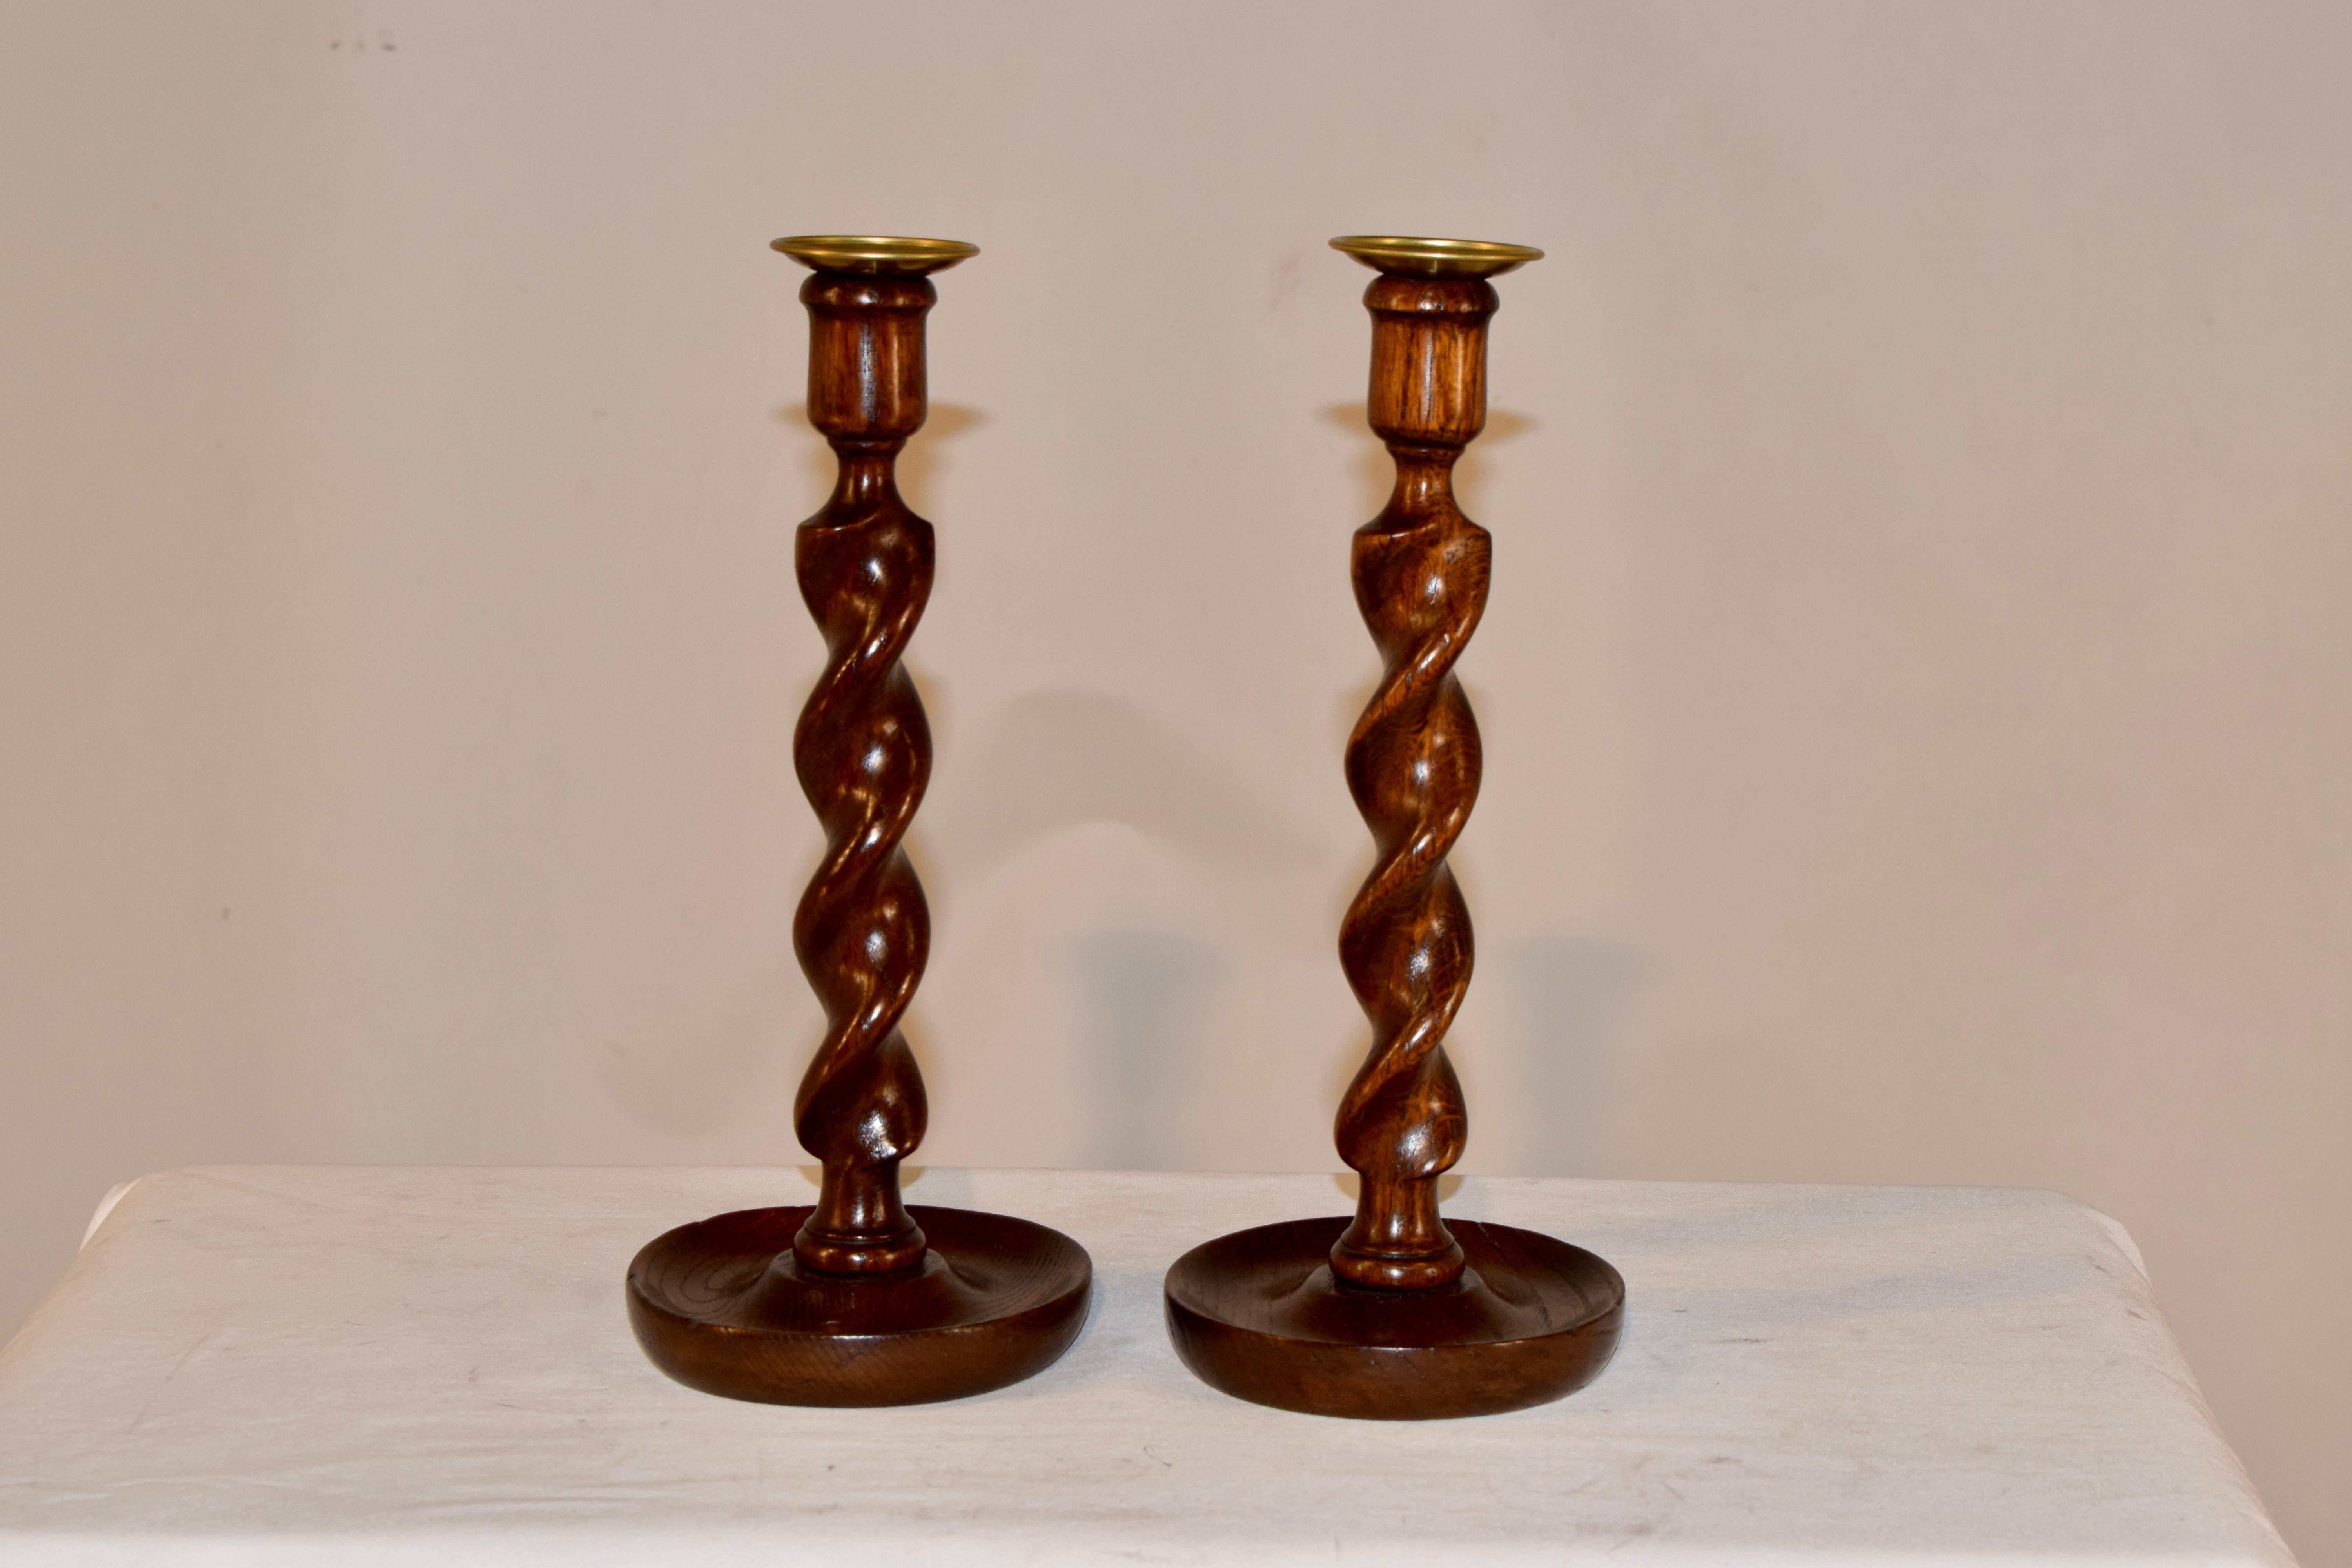 Pair of wonderfully decorative hand turned candlesticks made from oak. The candle cups are replaced with hand turned brass candle cups, which we had made in England. The hand turned barley twist stems are lovely and are supported on hand turned fish